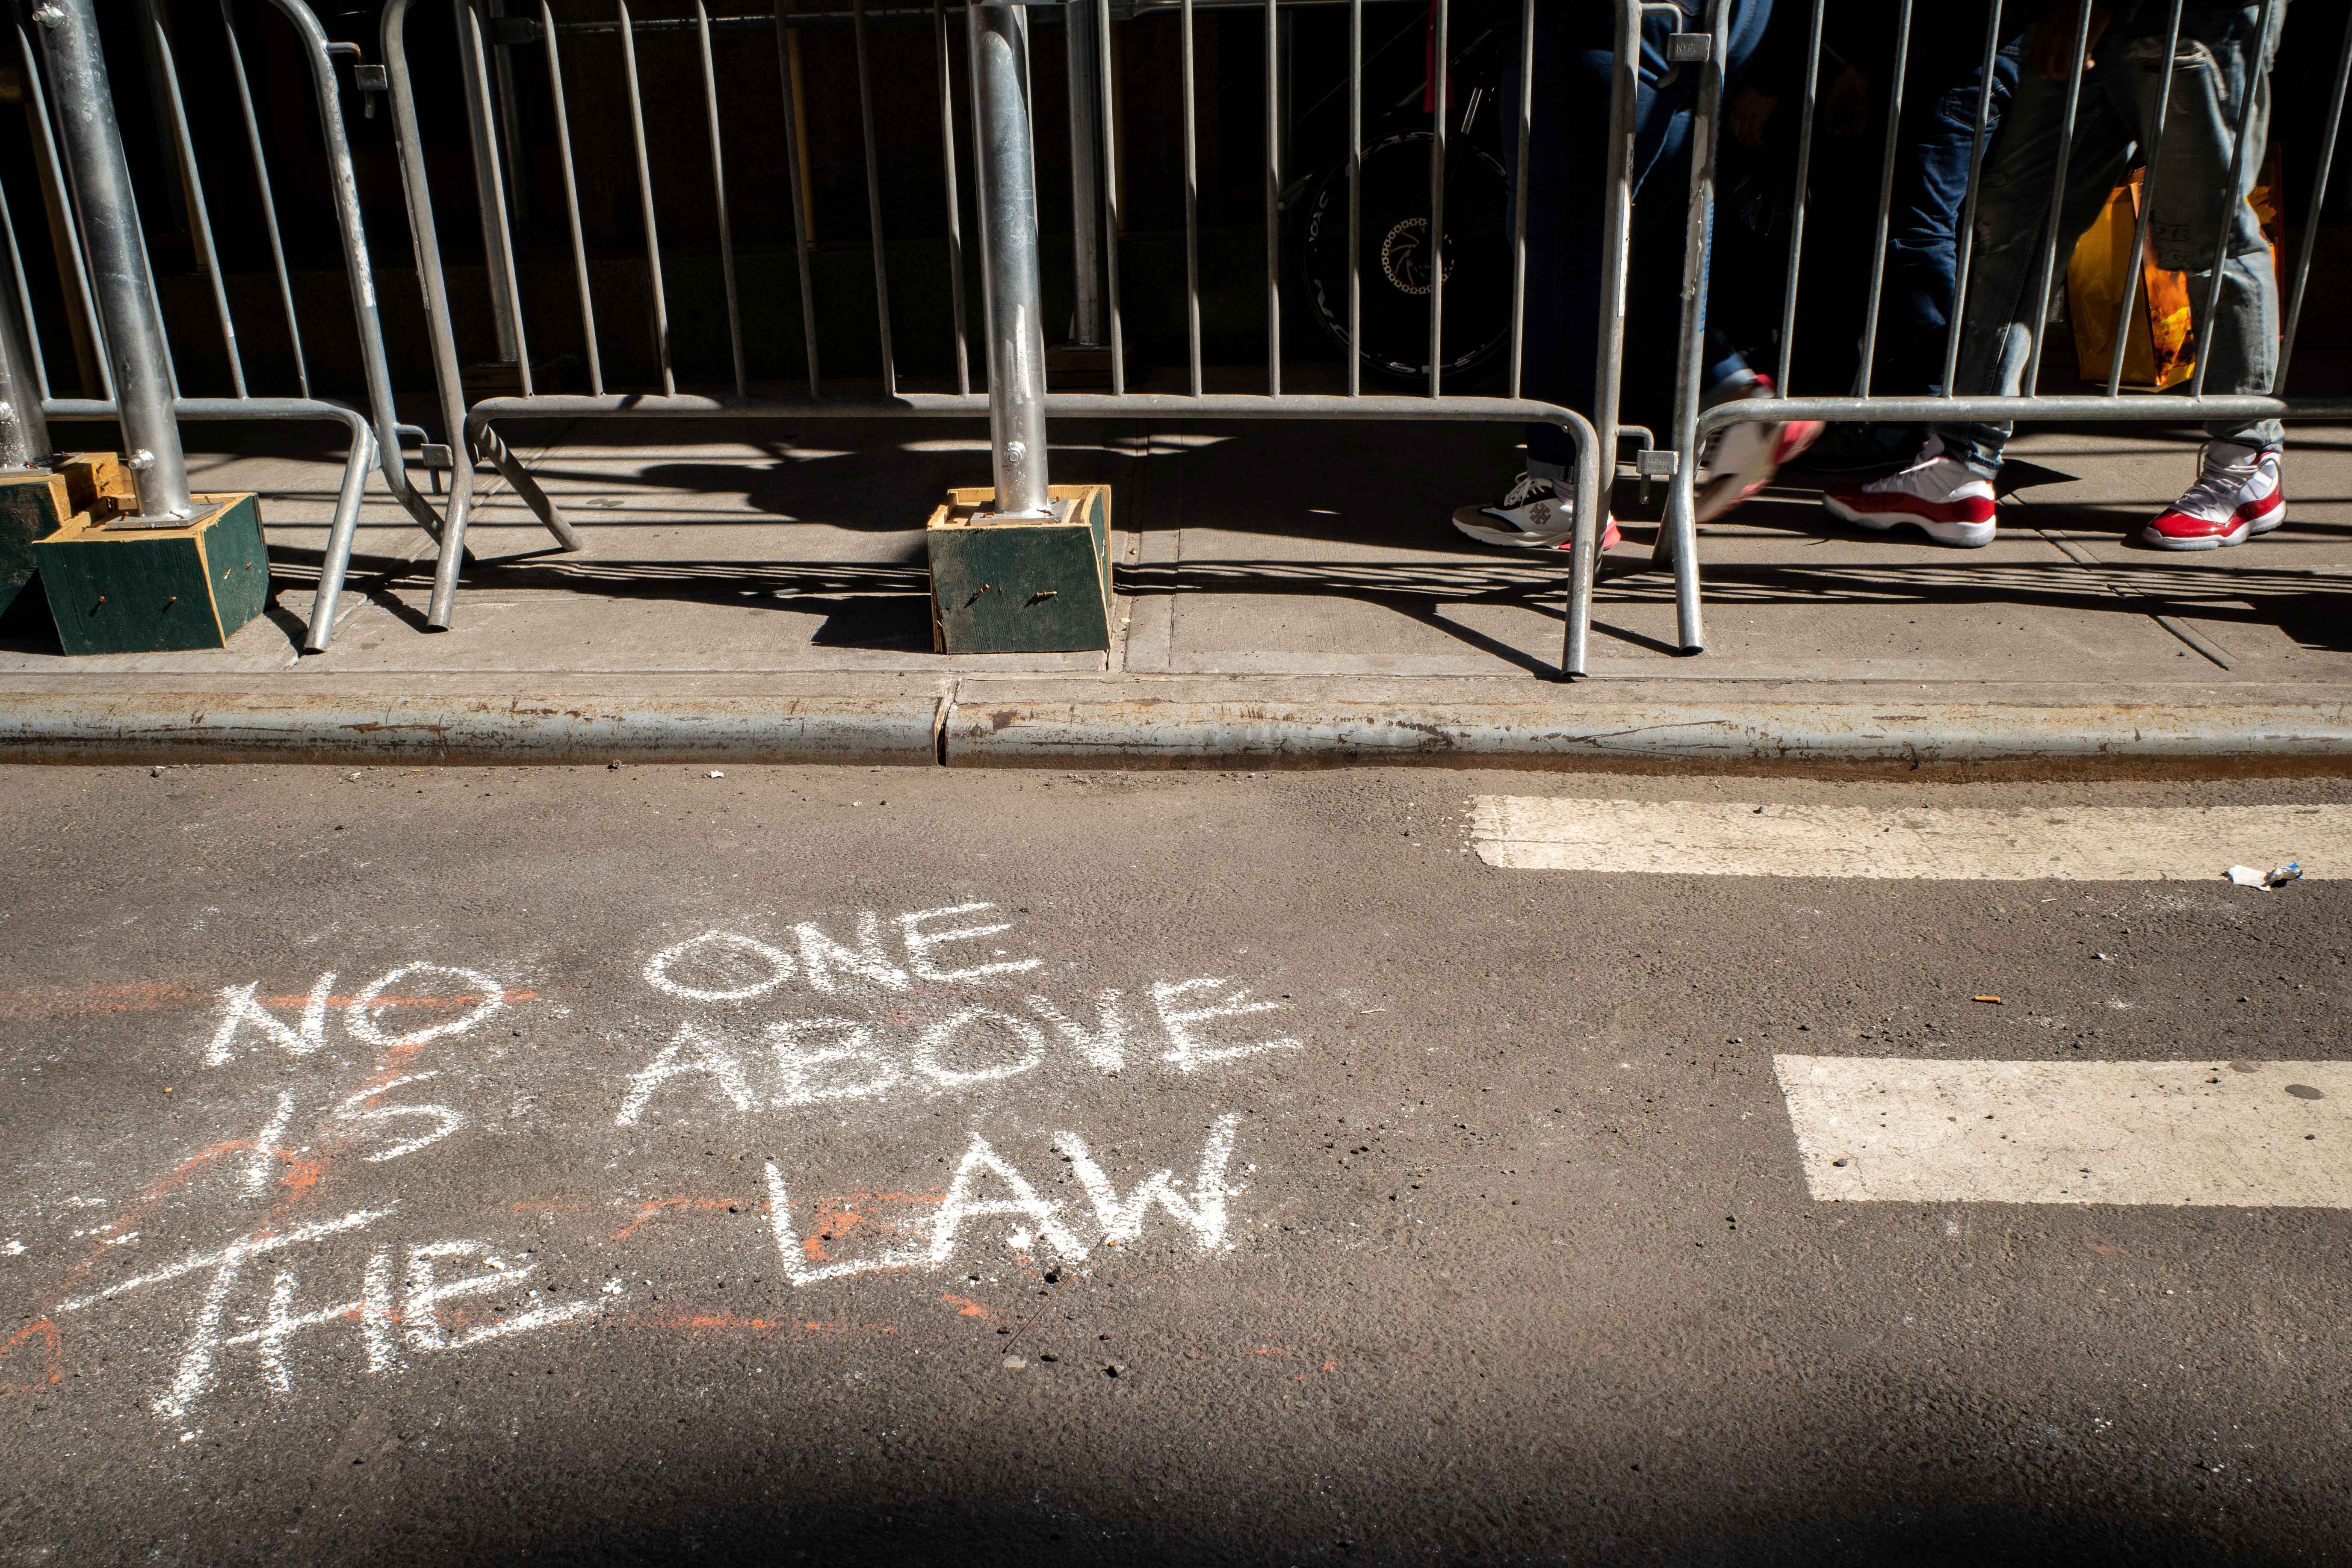 Chalk graffiti is seen on the ground outside of the Manhattan District Attorney's Office in New York